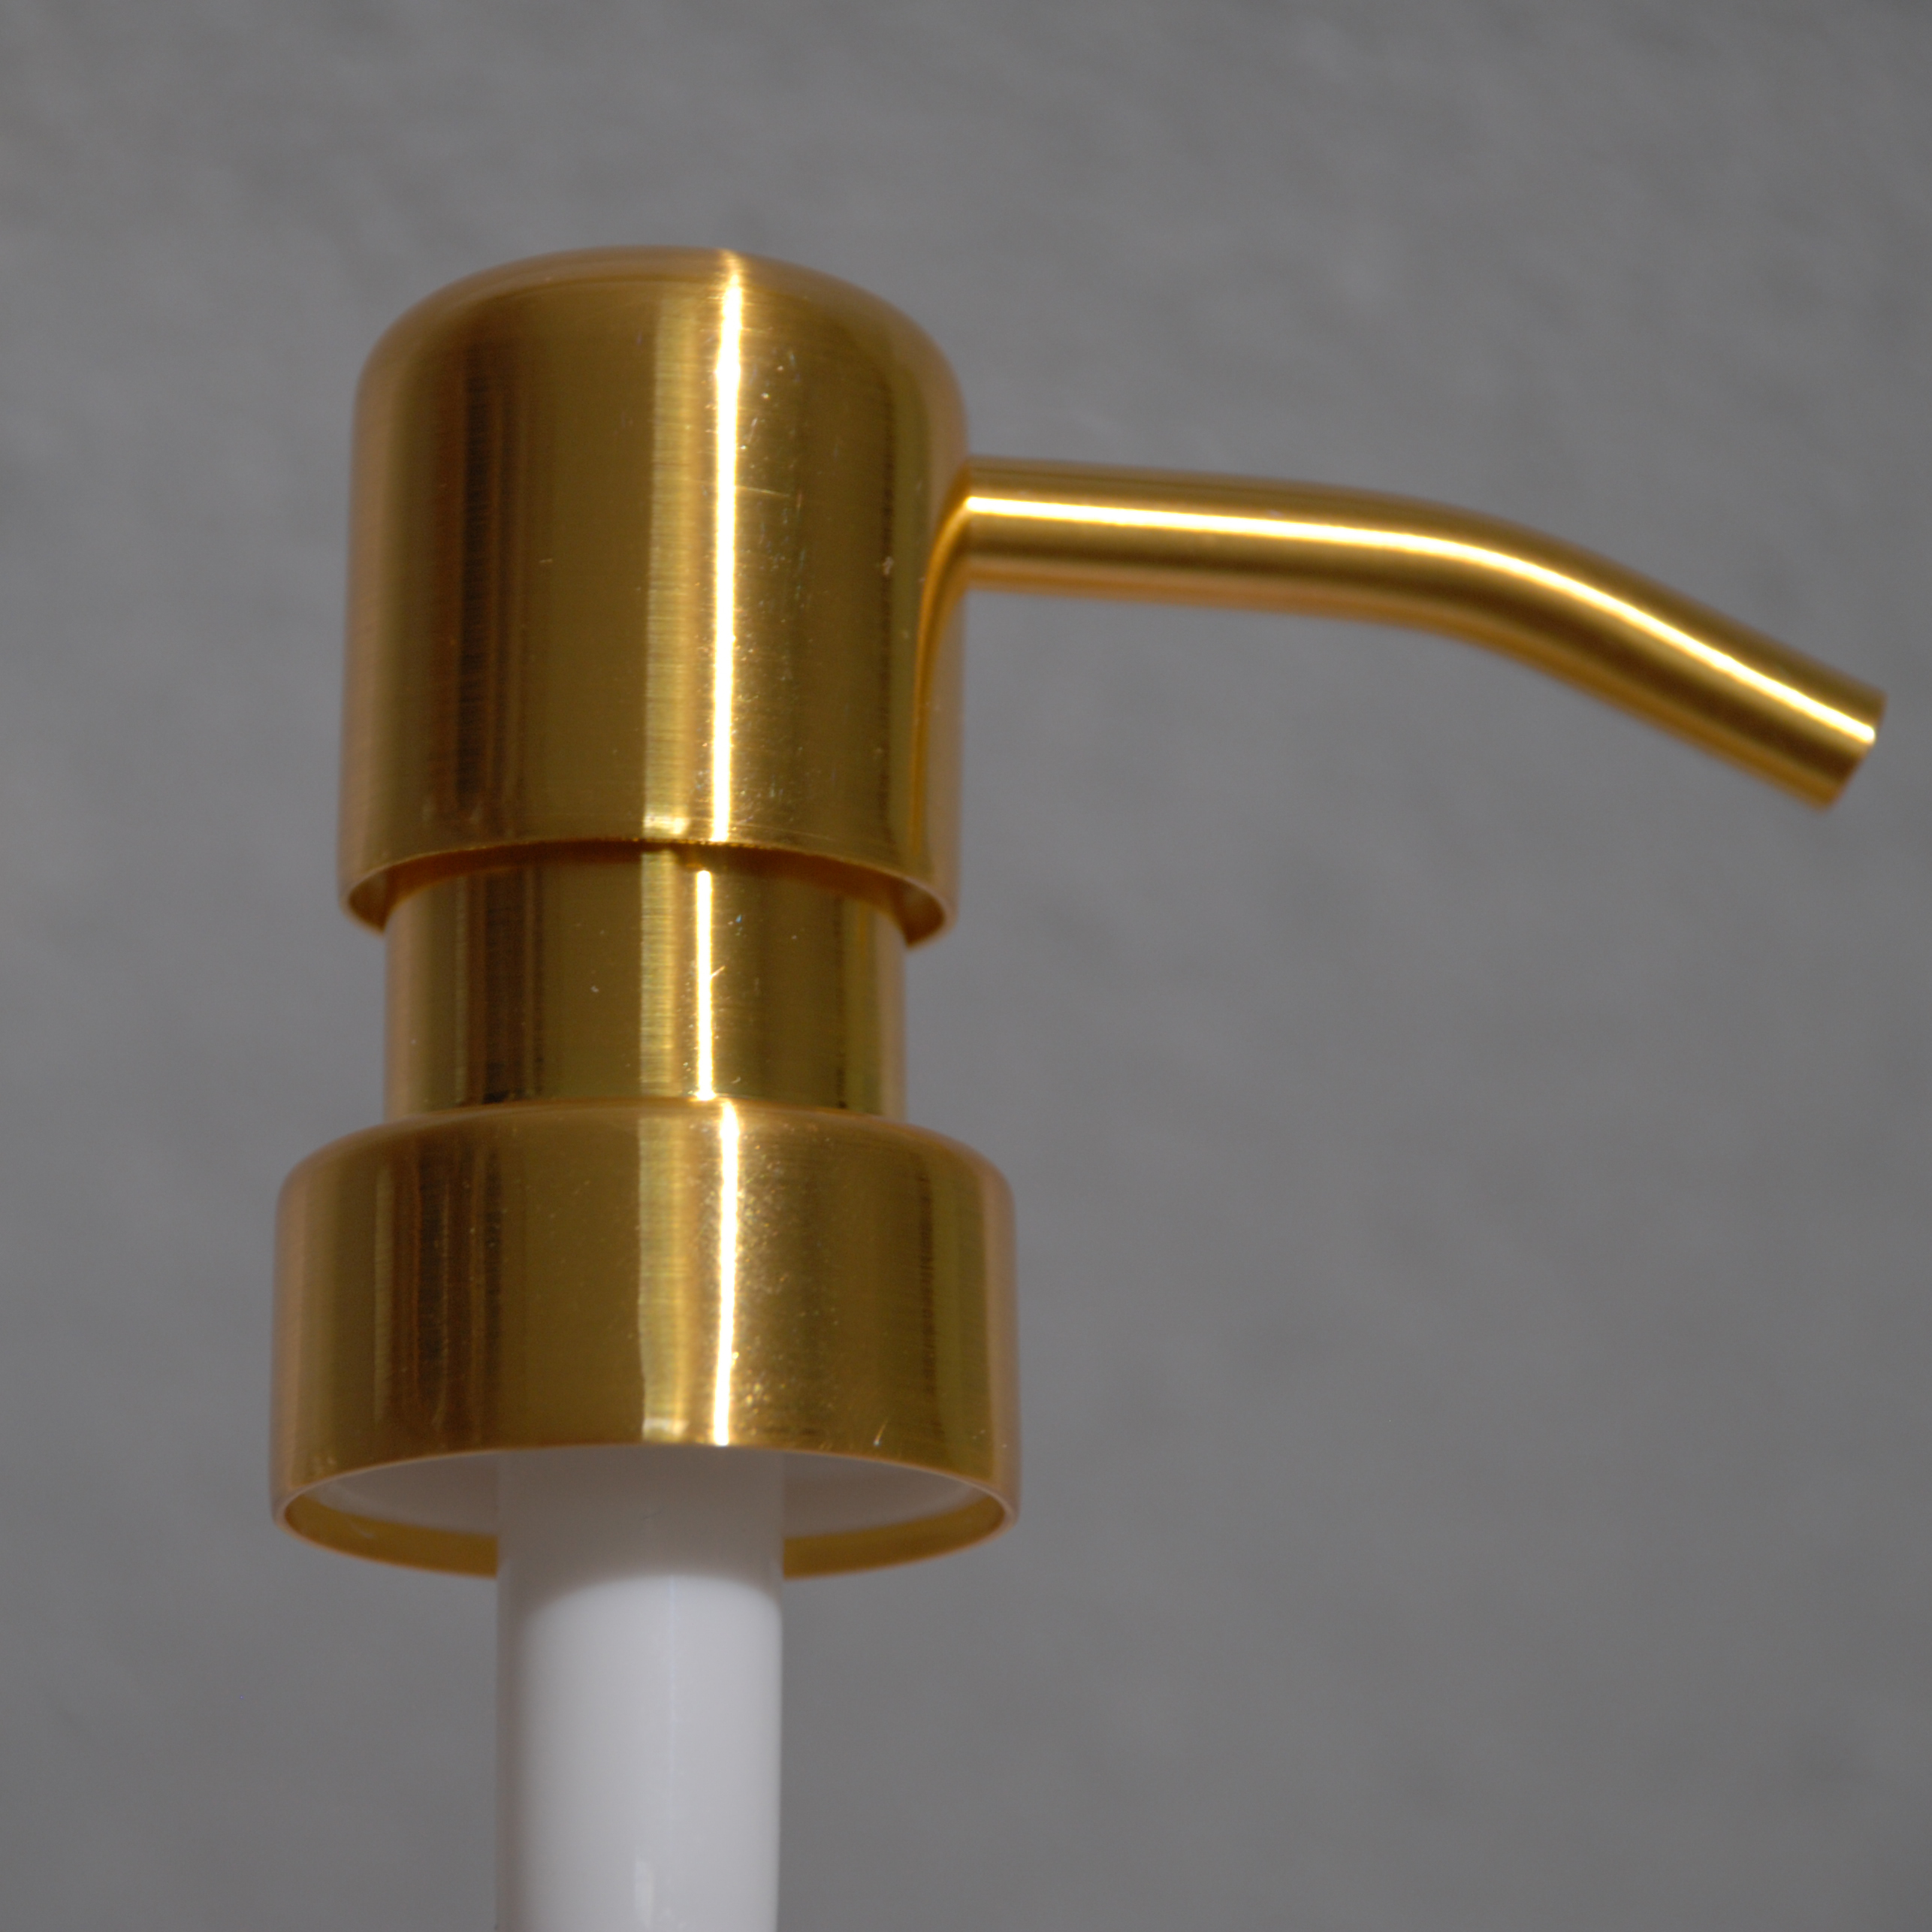 Brushed gold Soap/lotion Pump top with rounded head.